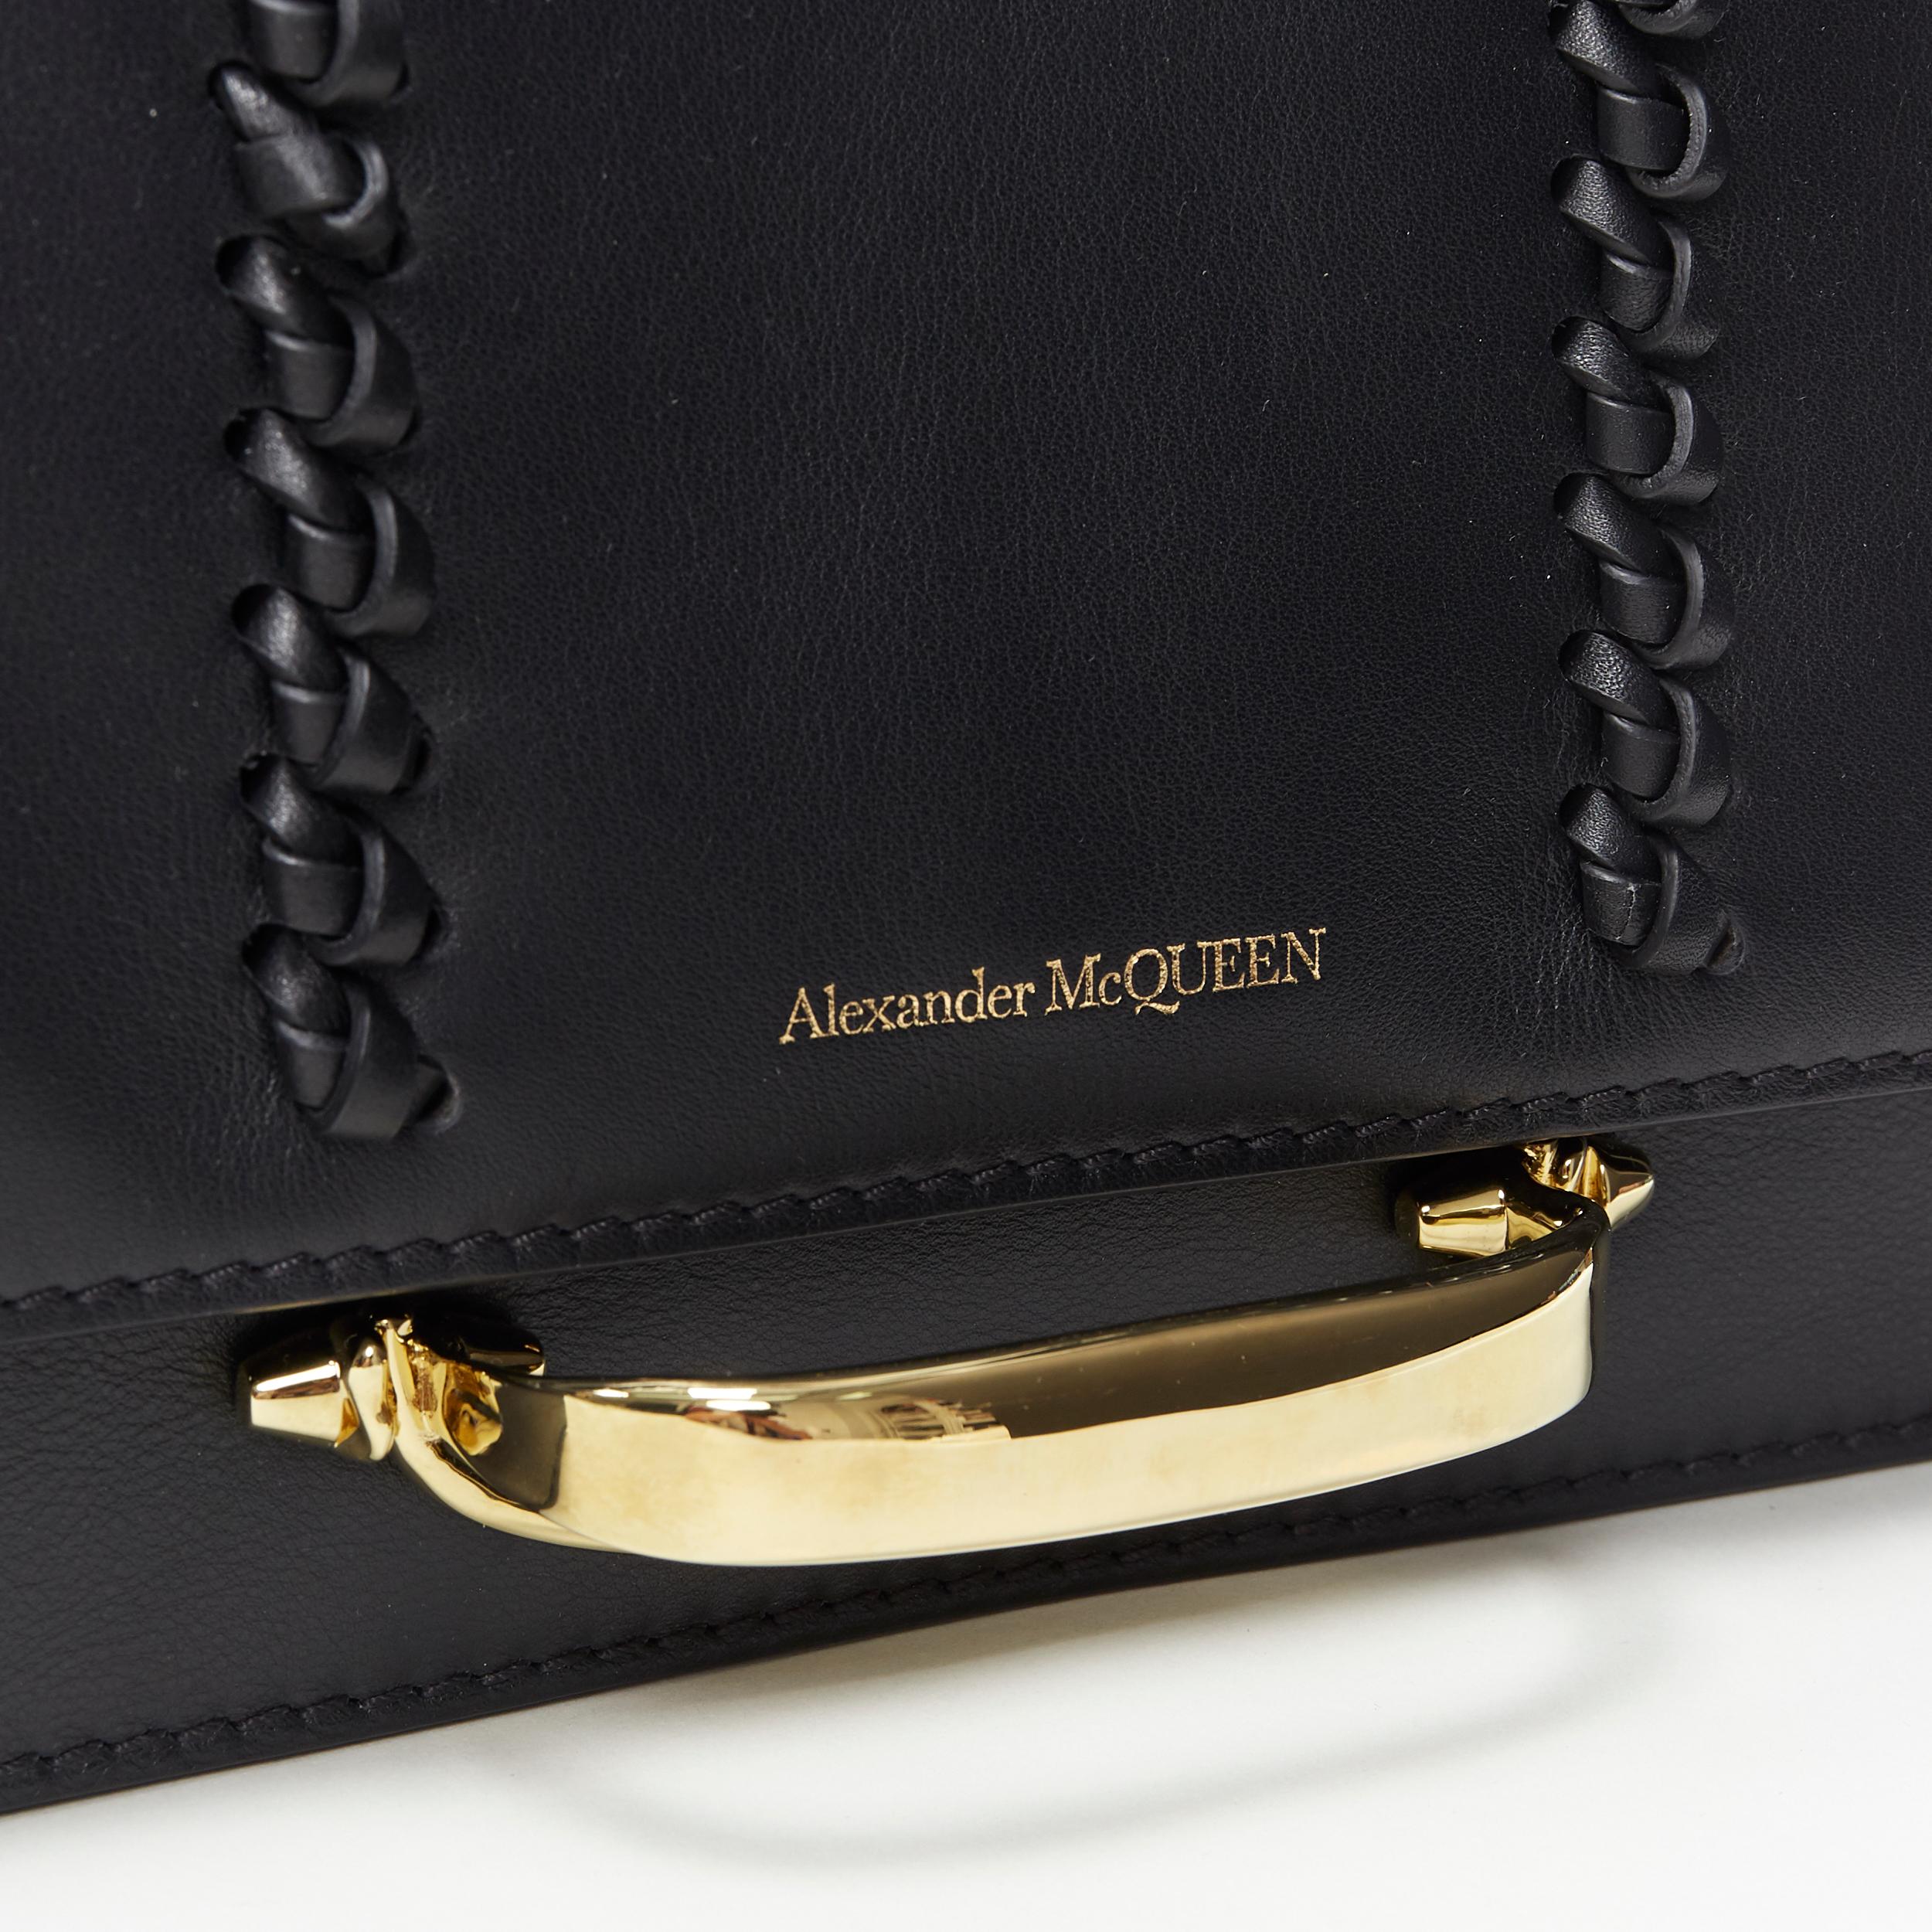 new ALEXANDER MCQUEEN The Story black leather whipstitch gold knuckle chain bag 1